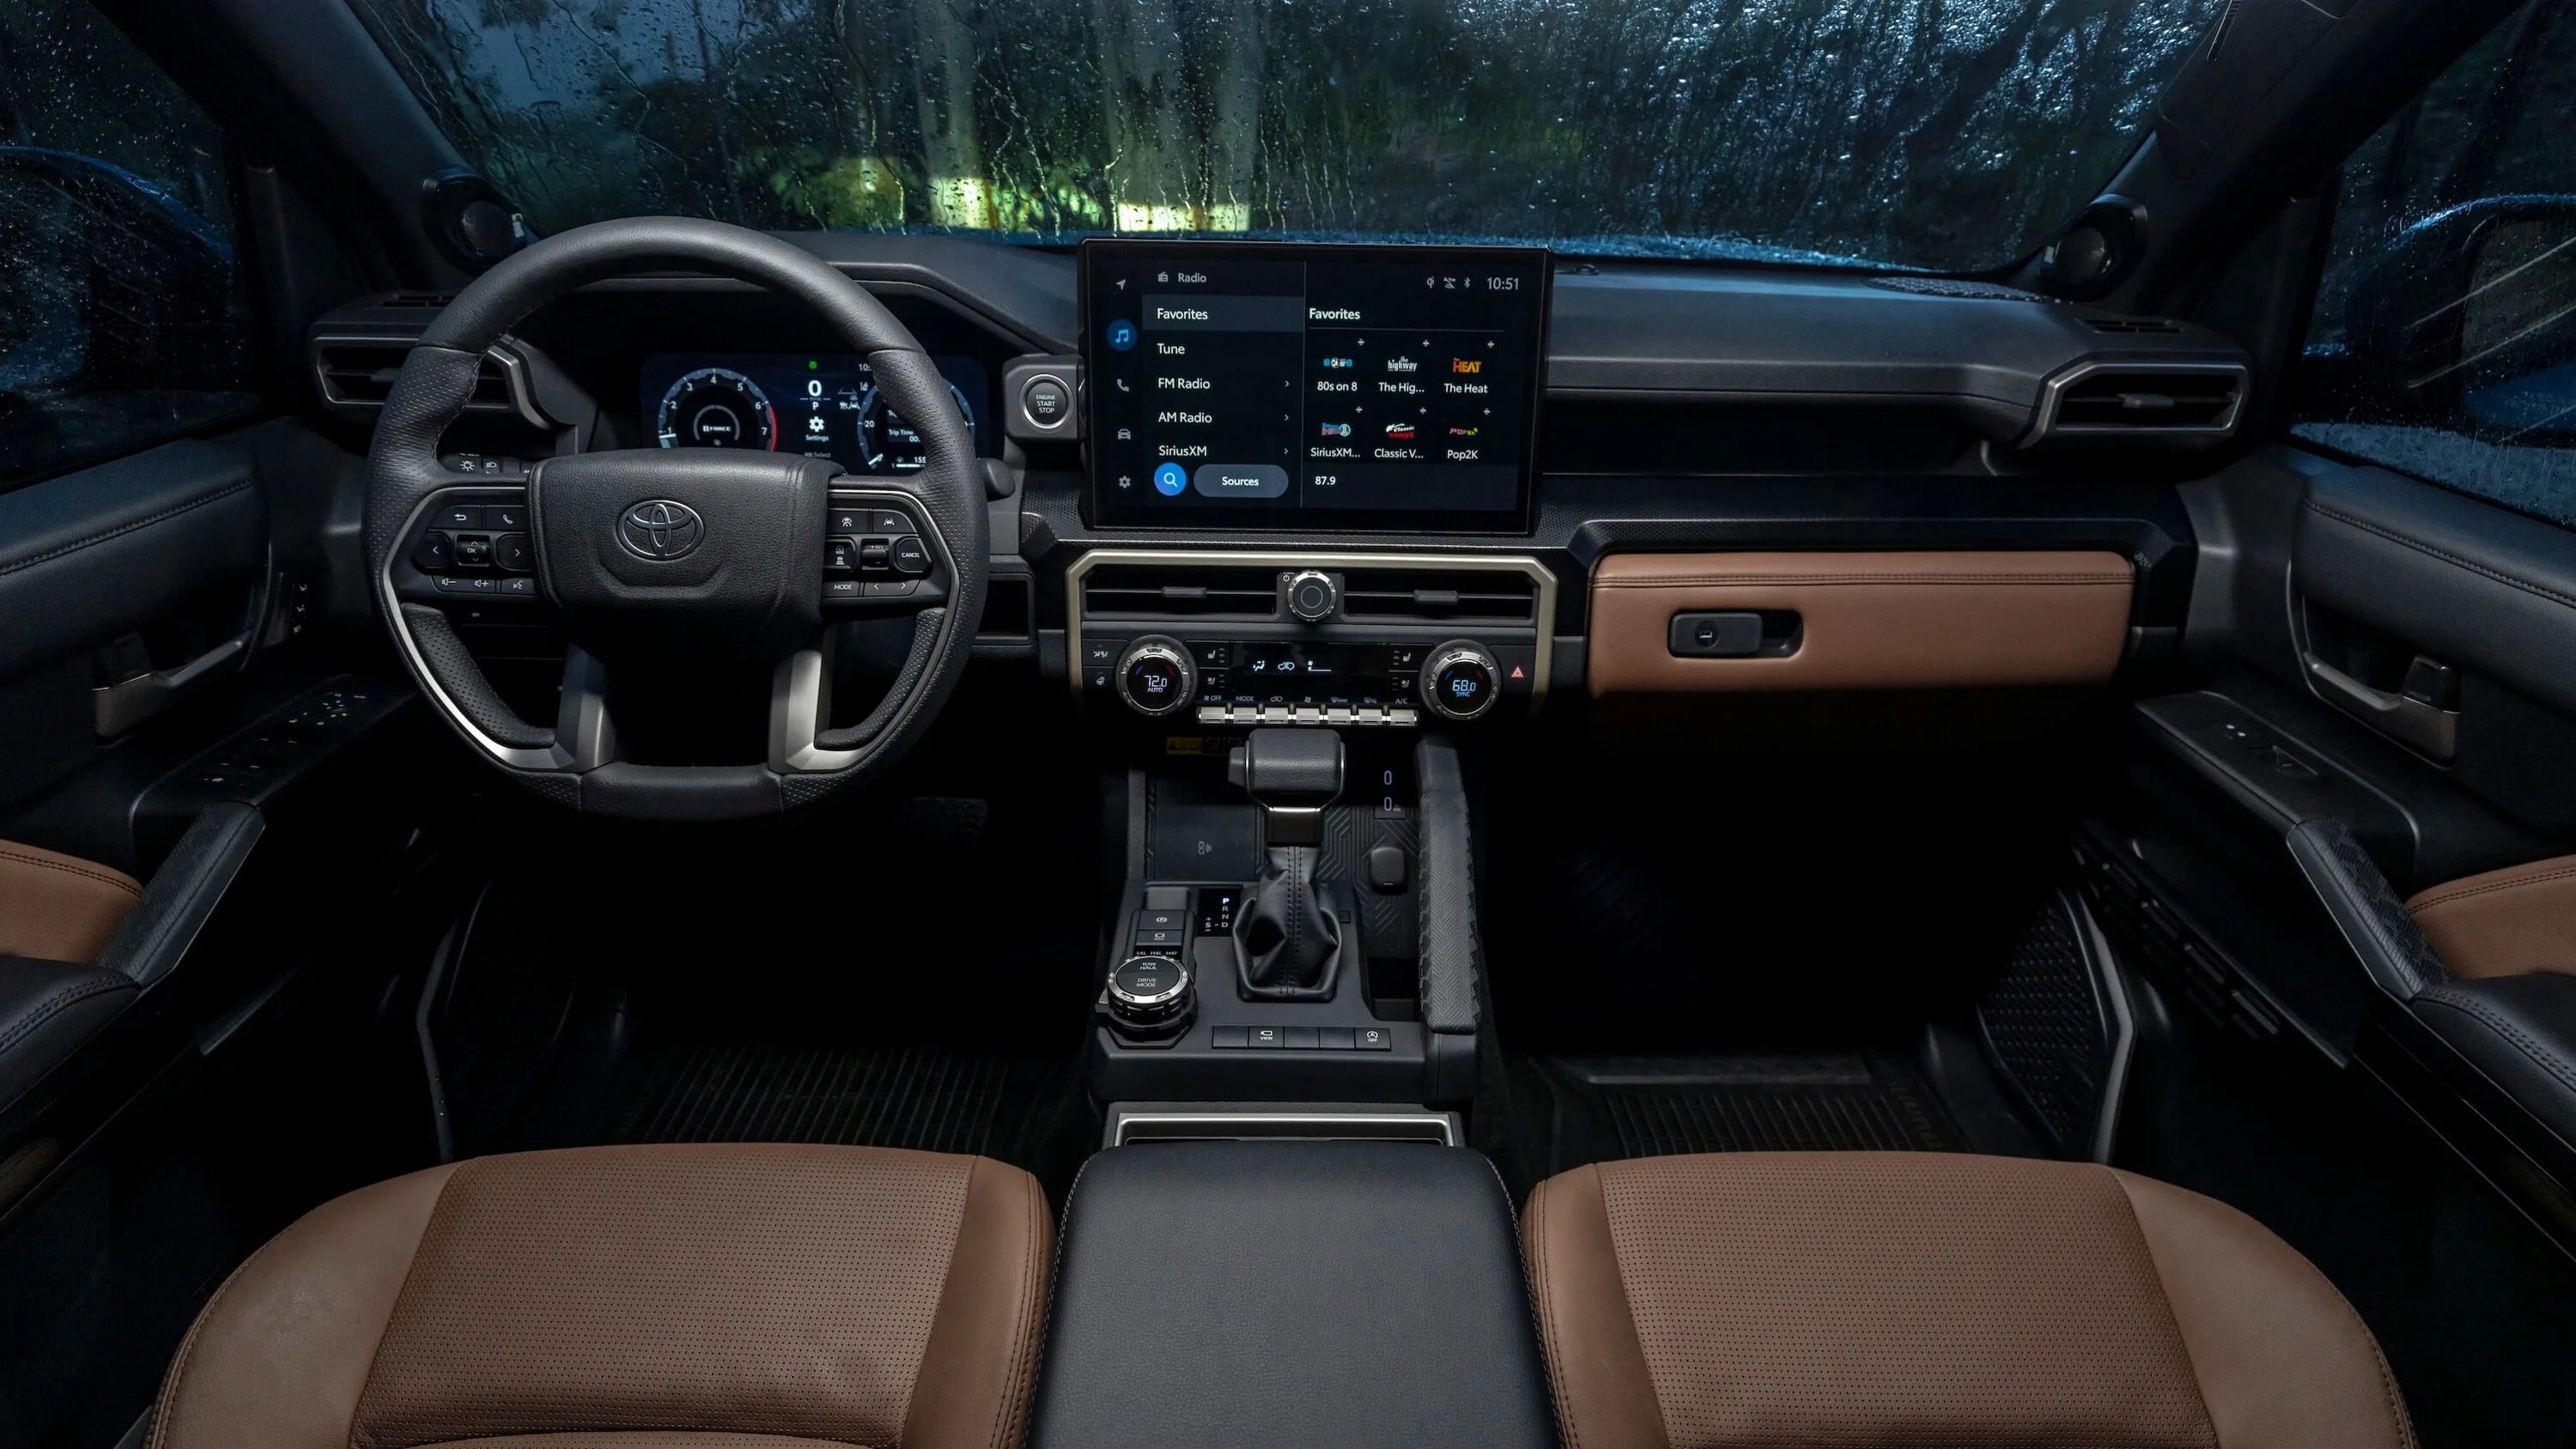 4Runner's technological suite is the optional 14.0-inch touchscreen infotainment system